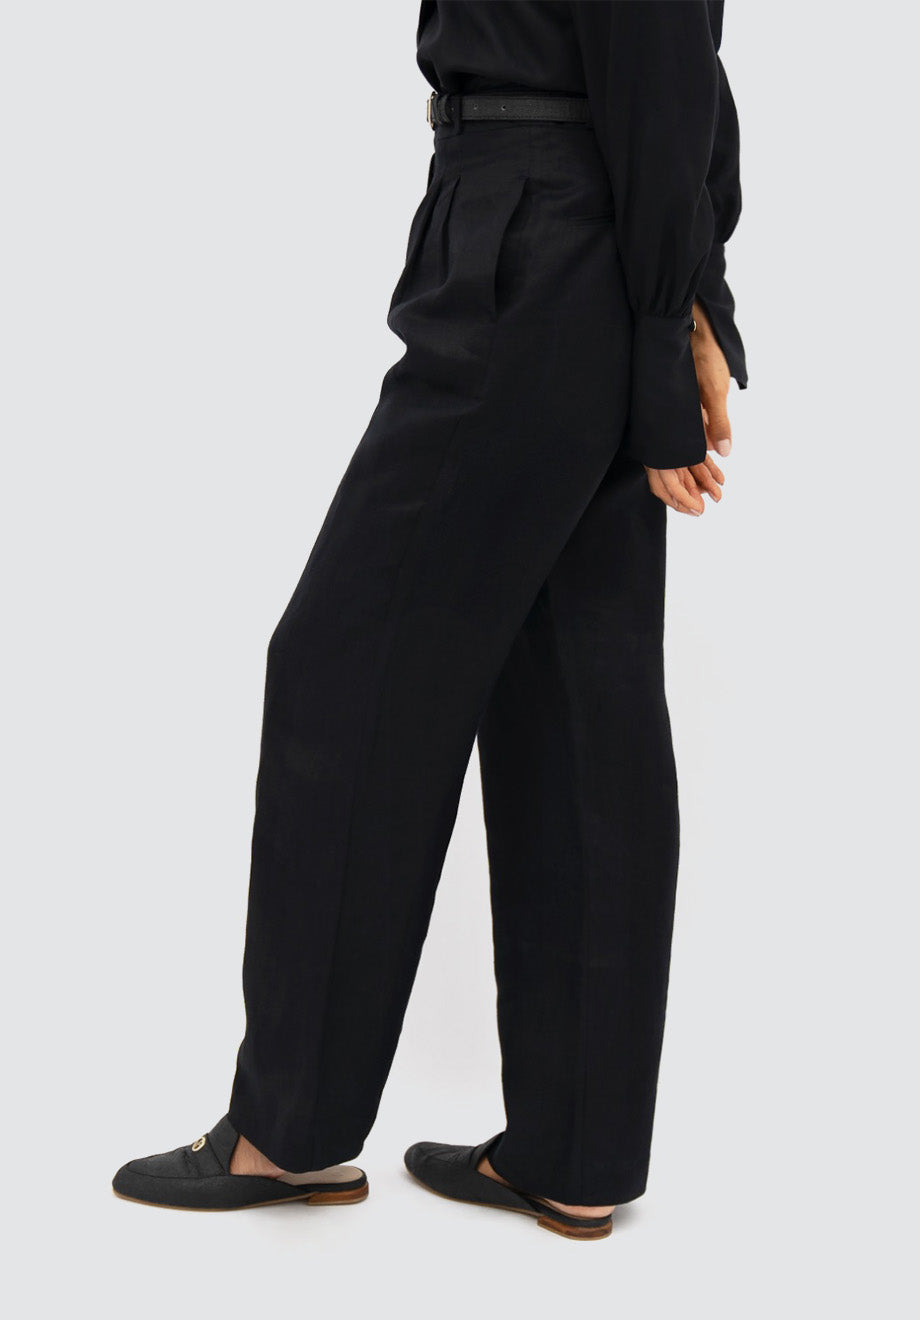 French Riviera NCE - Wide Leg Pants | Licorice